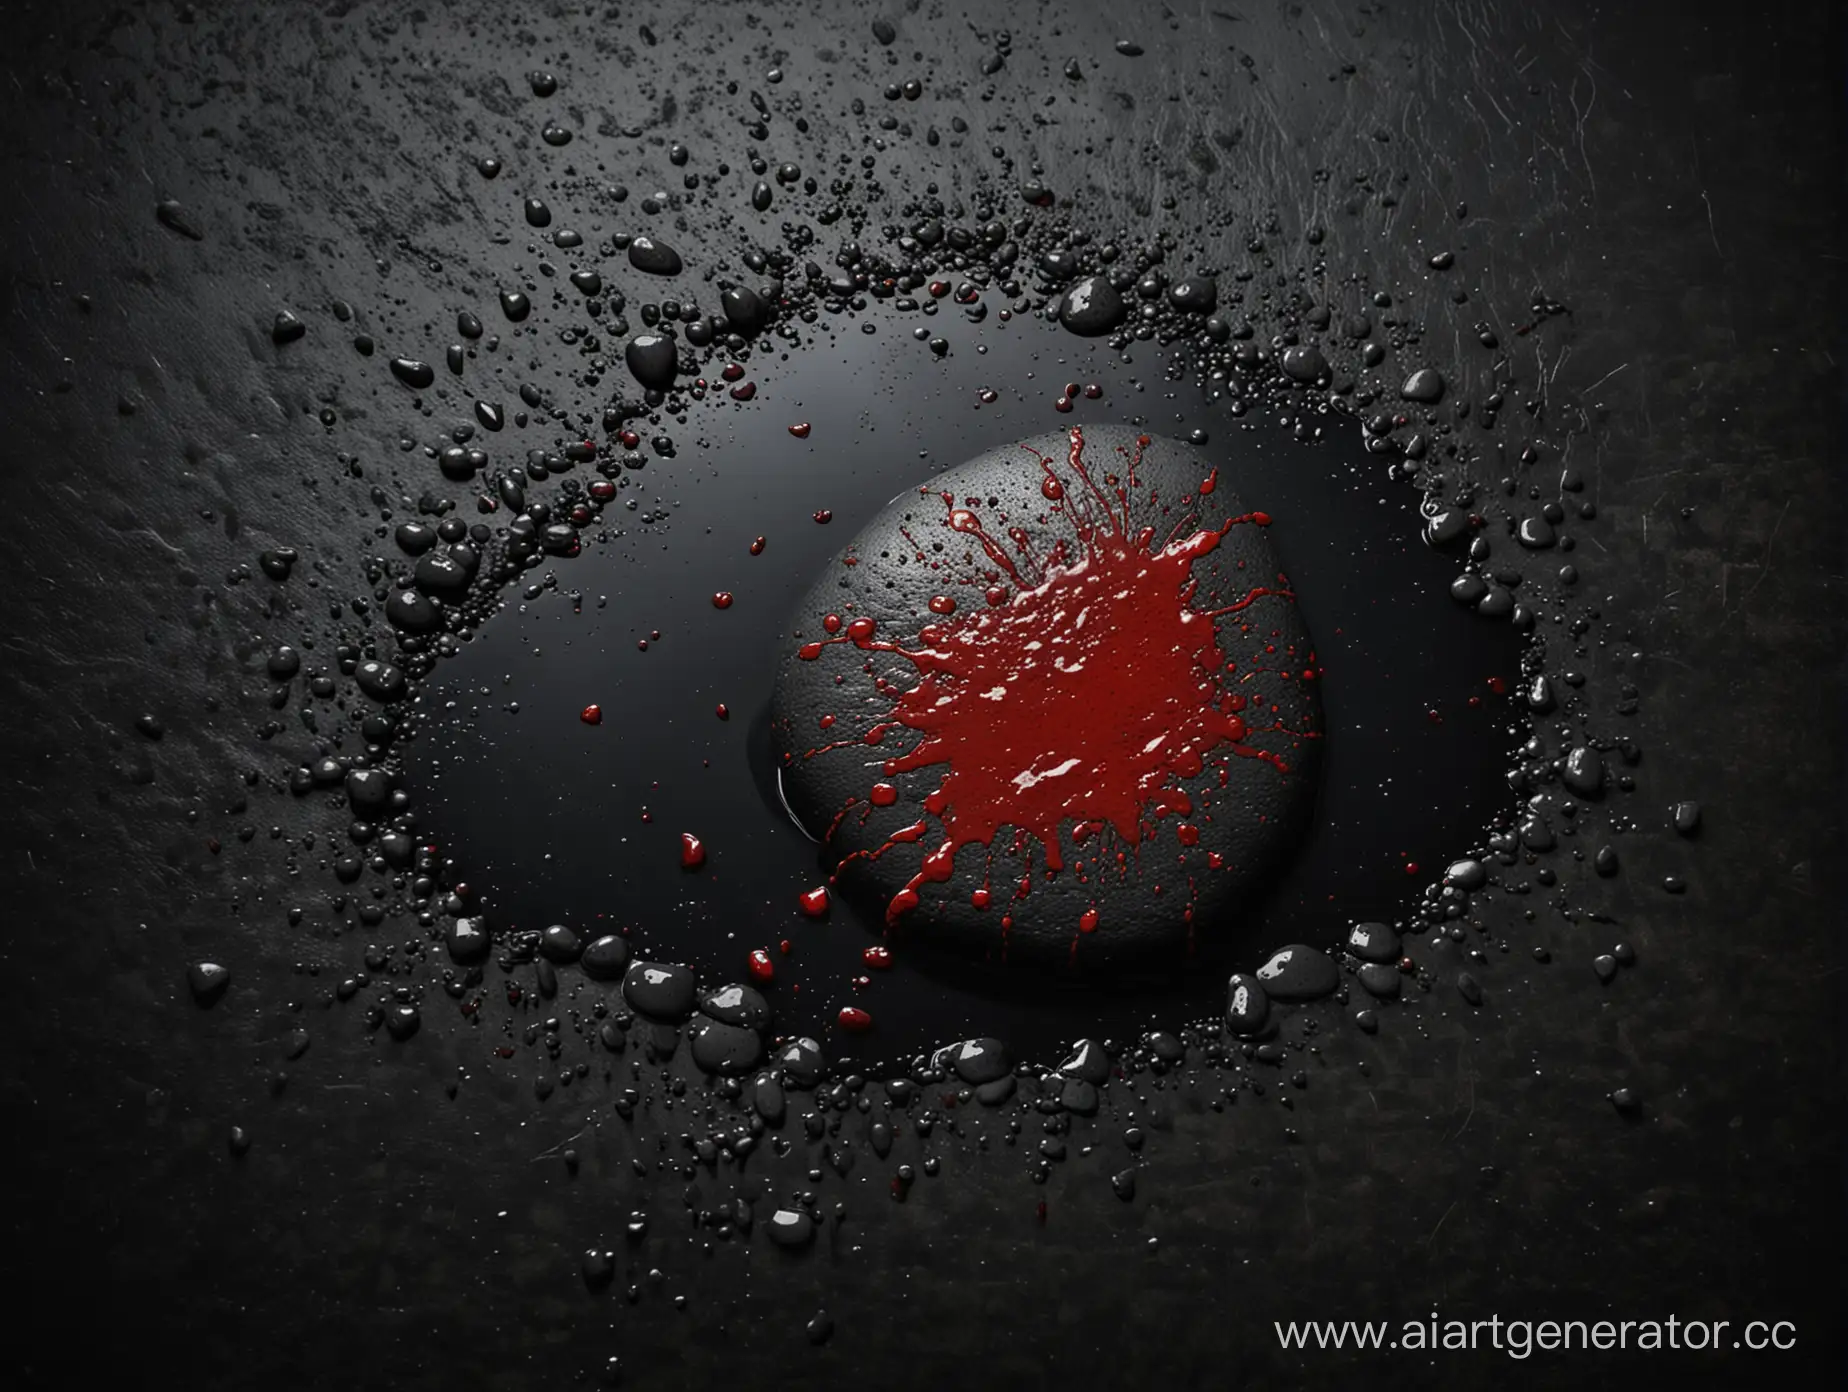 Mysterious-Stone-with-Puddle-of-Blood-on-Dark-Background